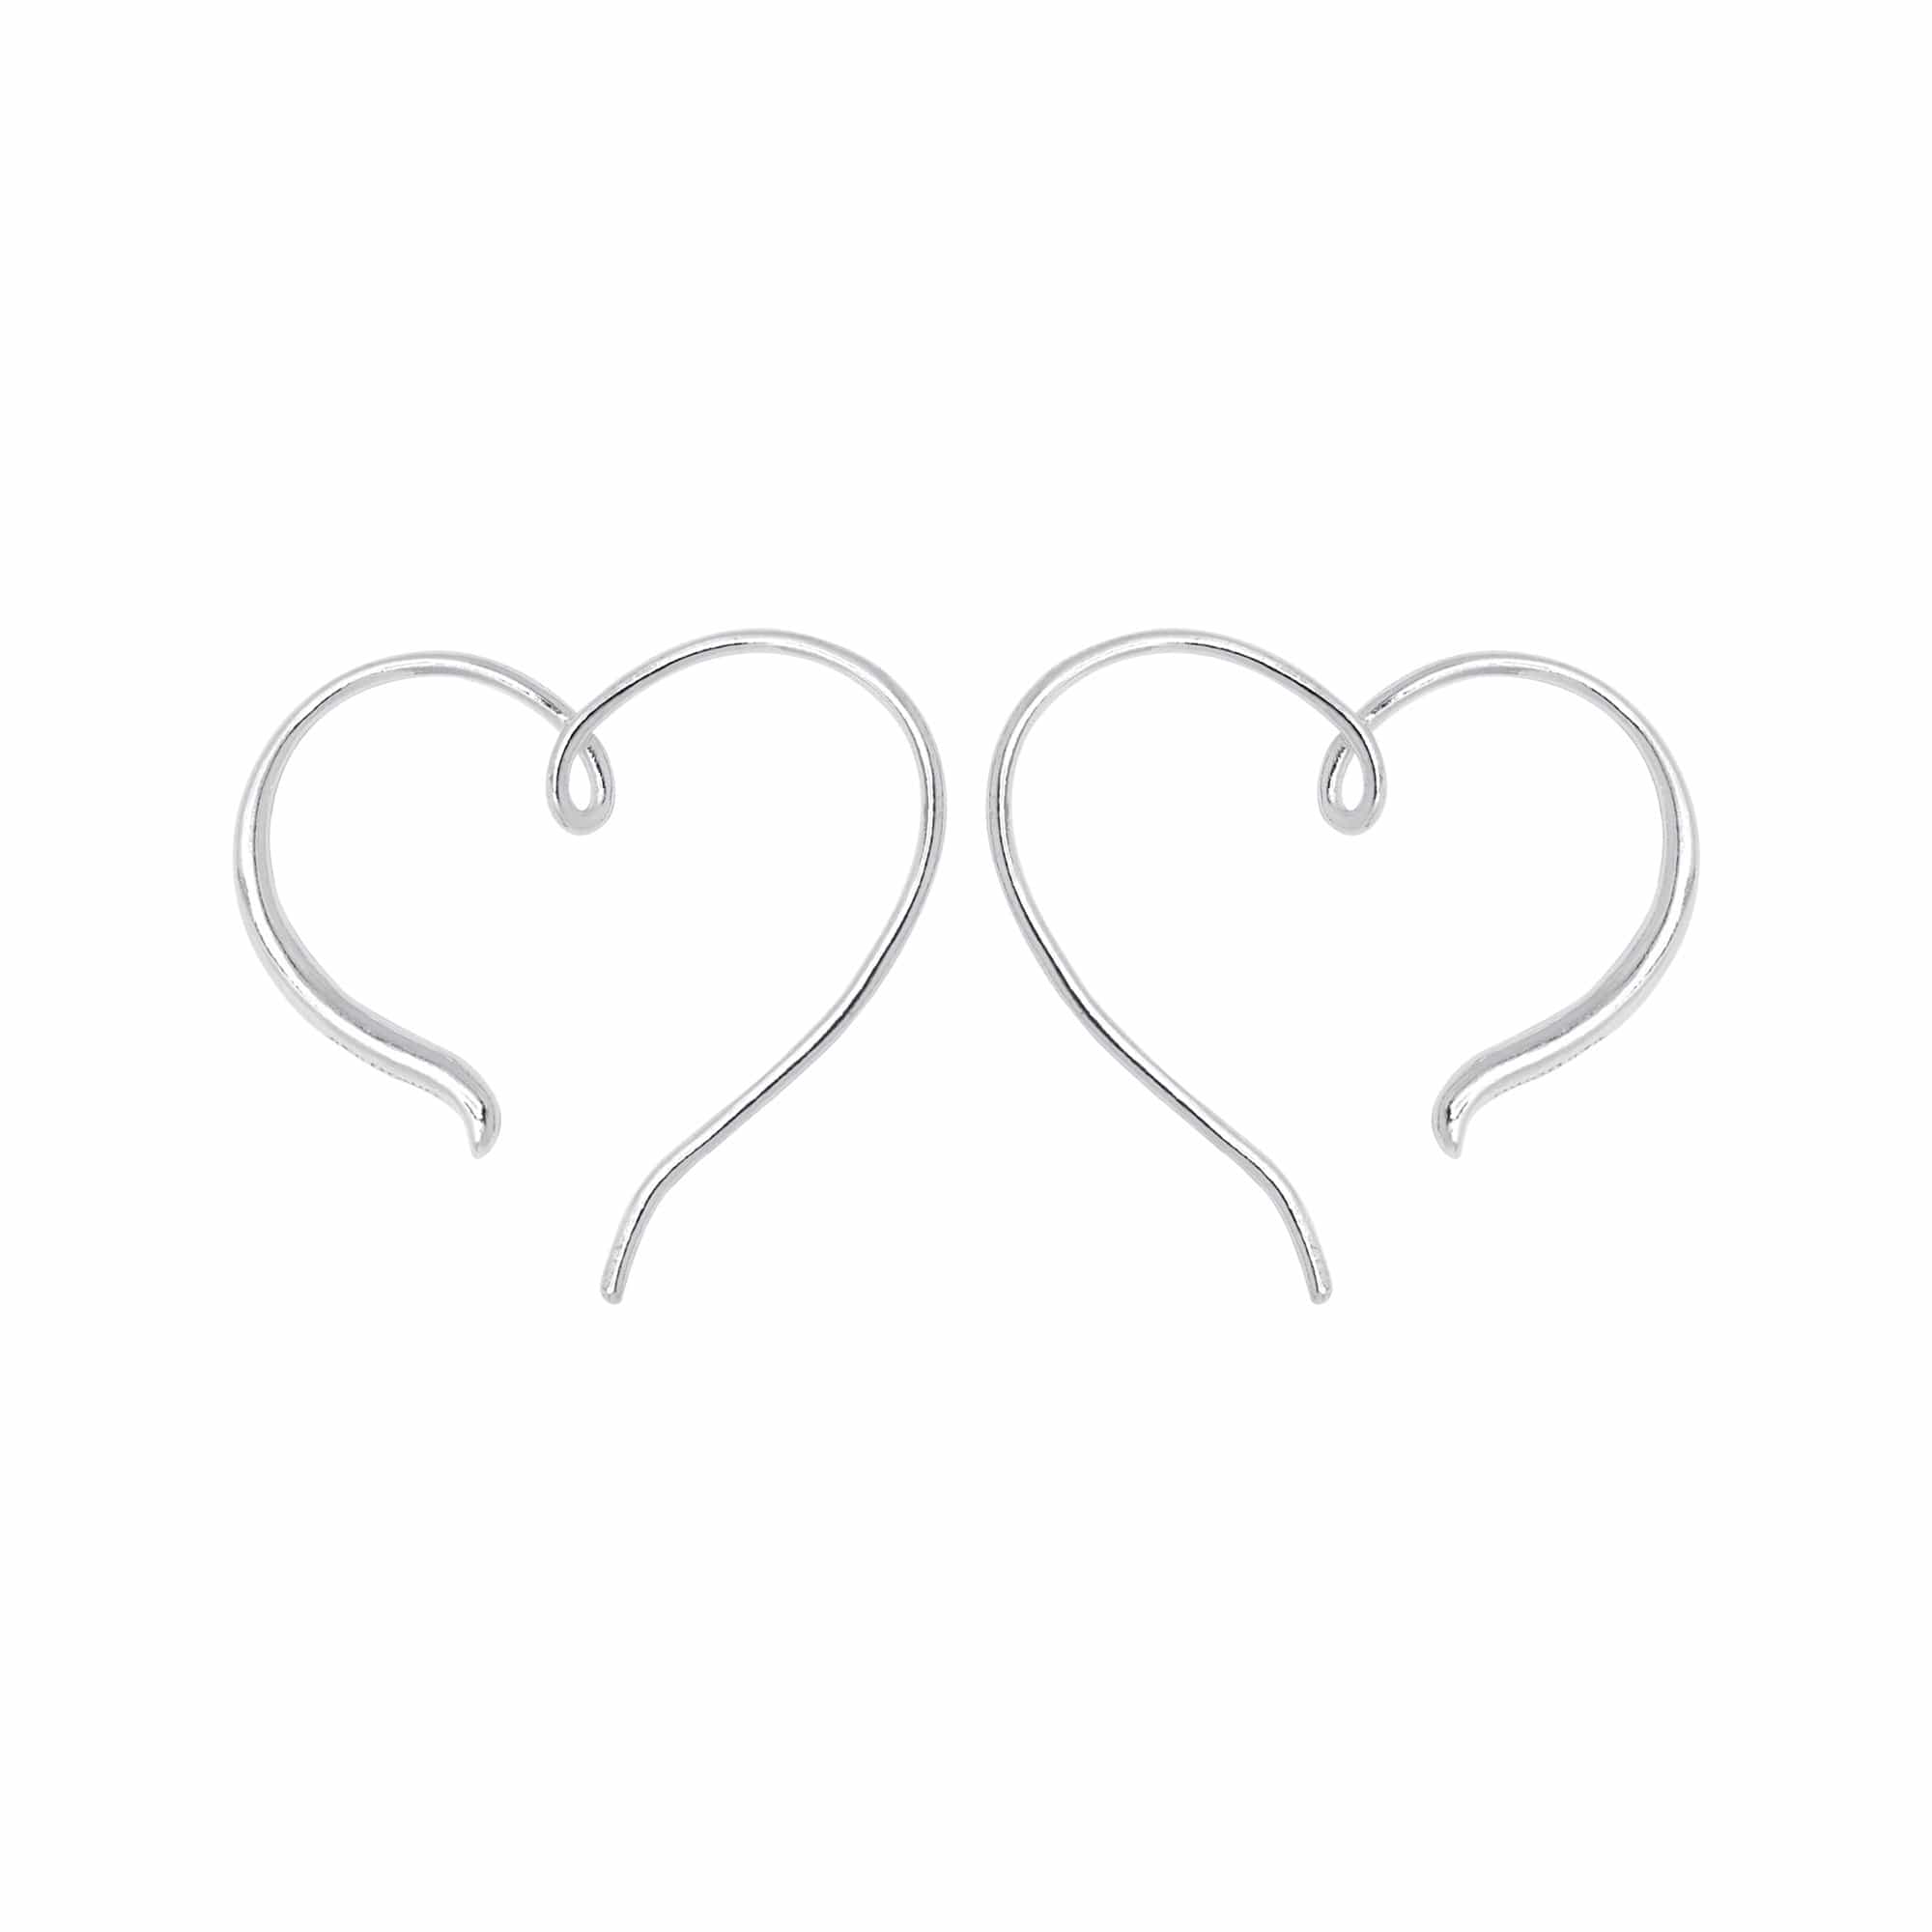 Boma Jewelry Earrings Heartstring Pull Through Hoops